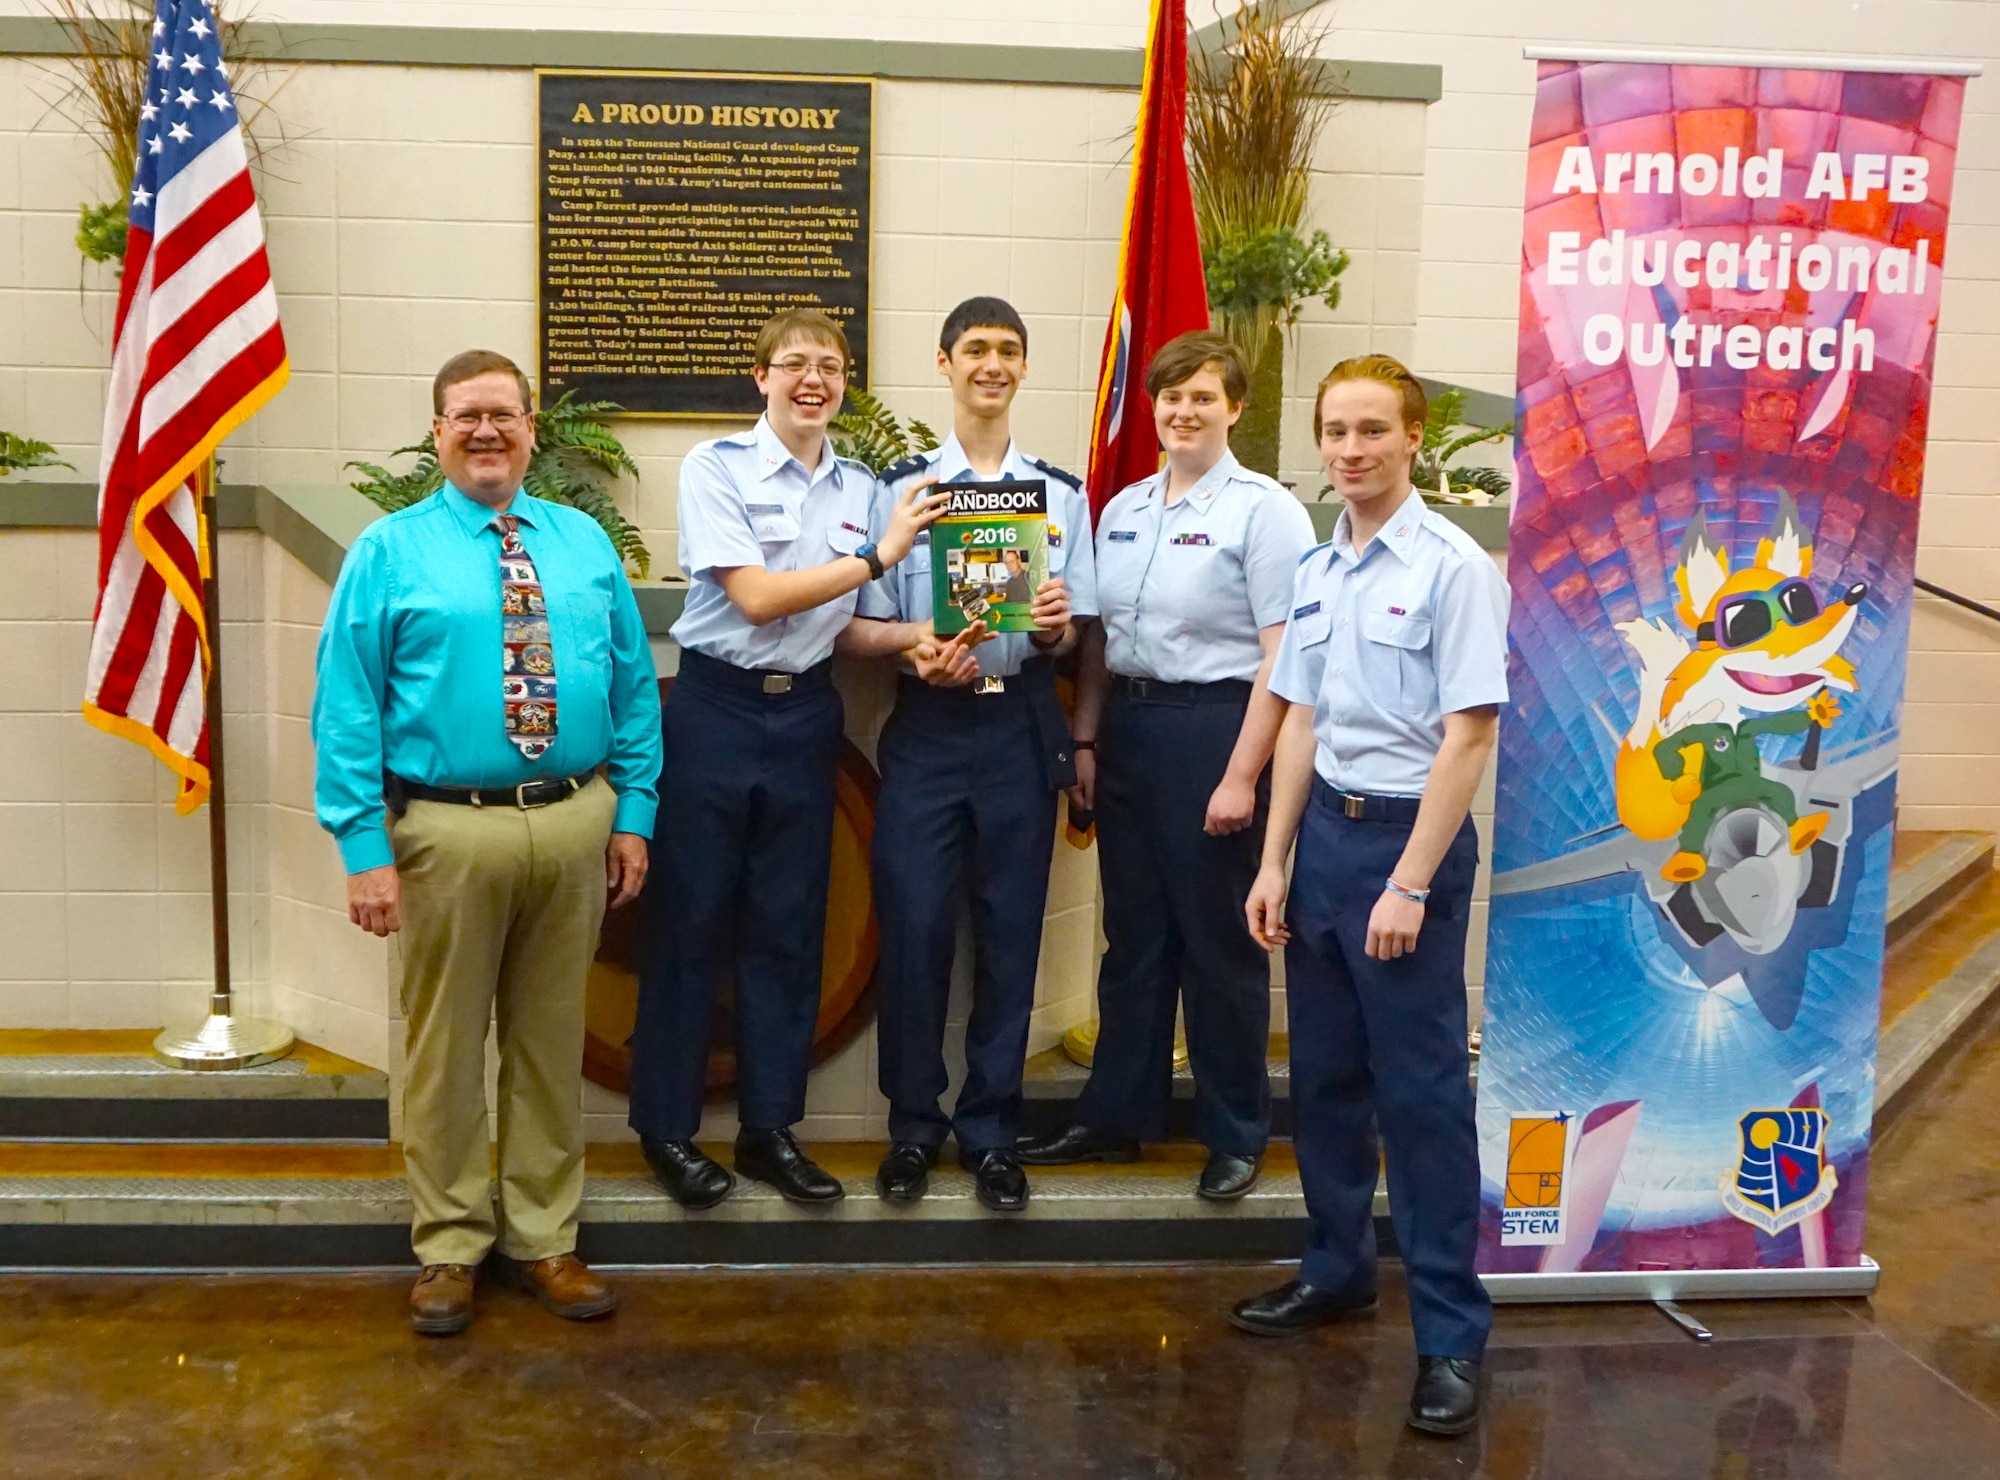 Michael Glennon (far left), technical director of AEDC Engineering and Technical Management, presents an Amateur Radio Relay League handbook to the Tullahoma Civil Air Patrol Composite Squadron May 23, recognizing their STEM electronic and robot program. Pictured with Glennon left to right is Hayden Thompson, William Watters, Brenan Bailey and William Lore. The book was presented on behalf of the AEDC amateur radio members who support STEM efforts with the group. AEDC STEM program also supports the Tullahoma CAP. (Courtesy photo)